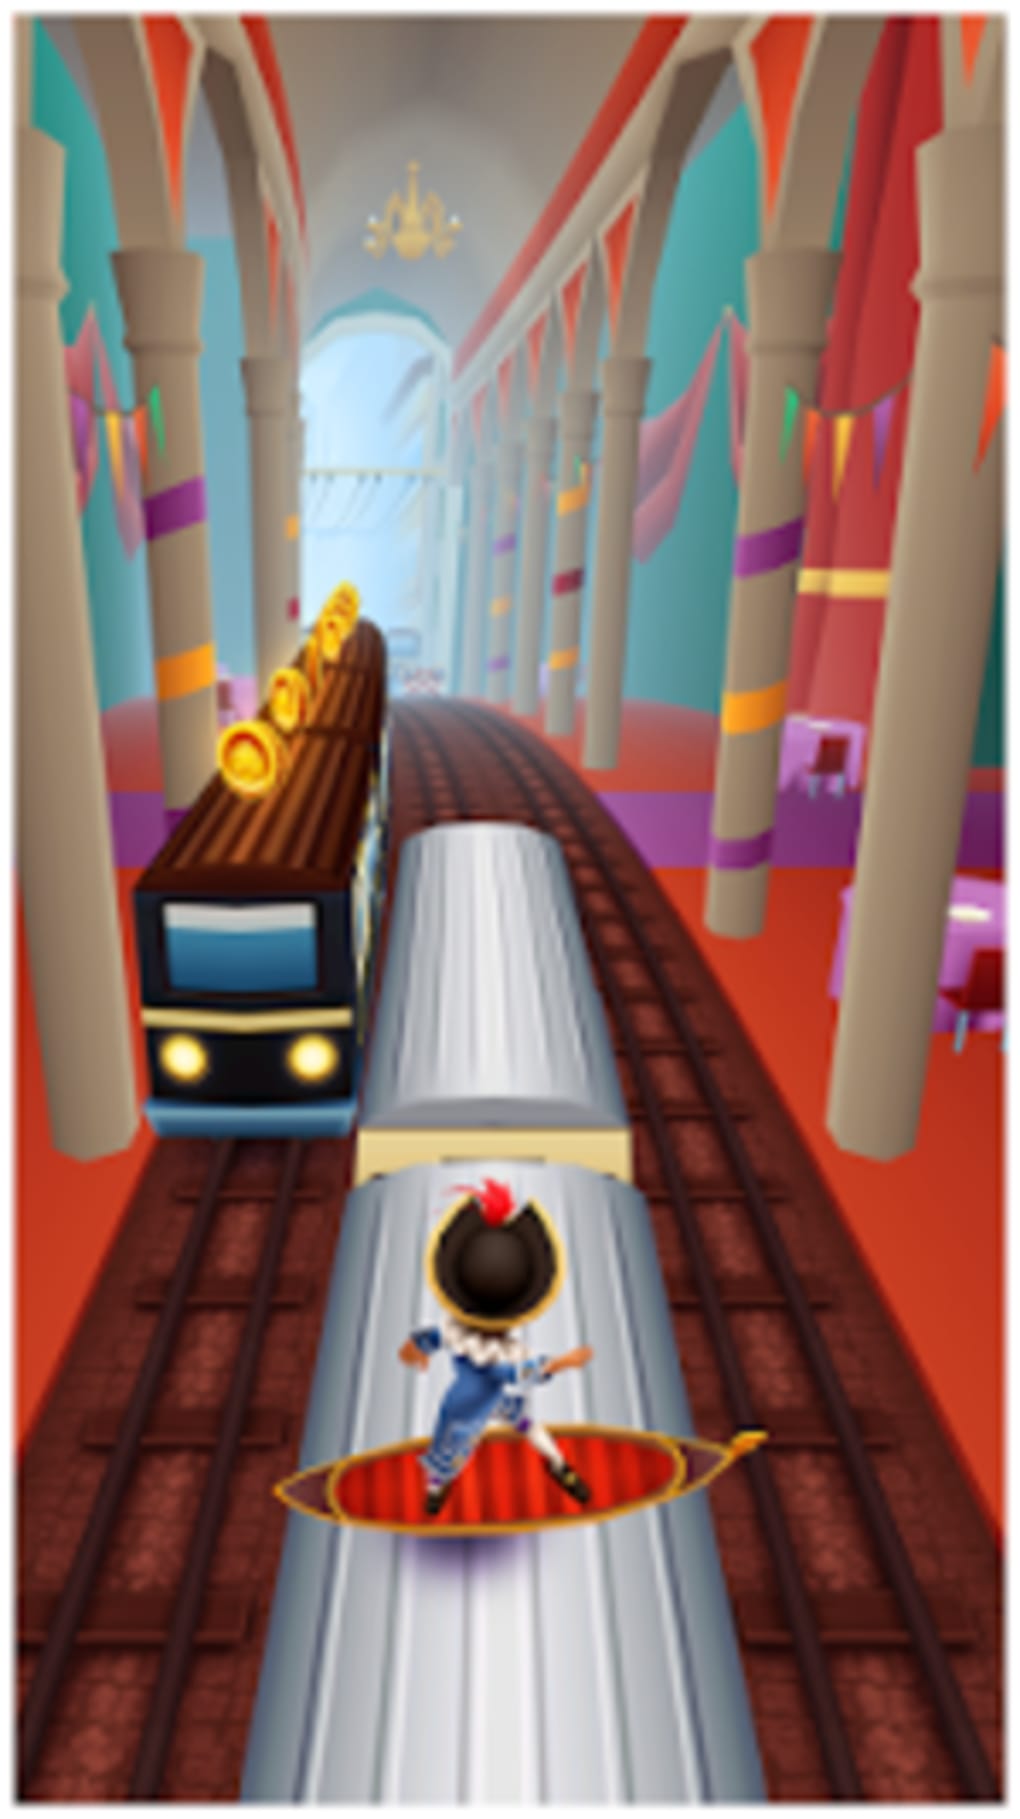 Download Subway Surfer For Android 2.3 5